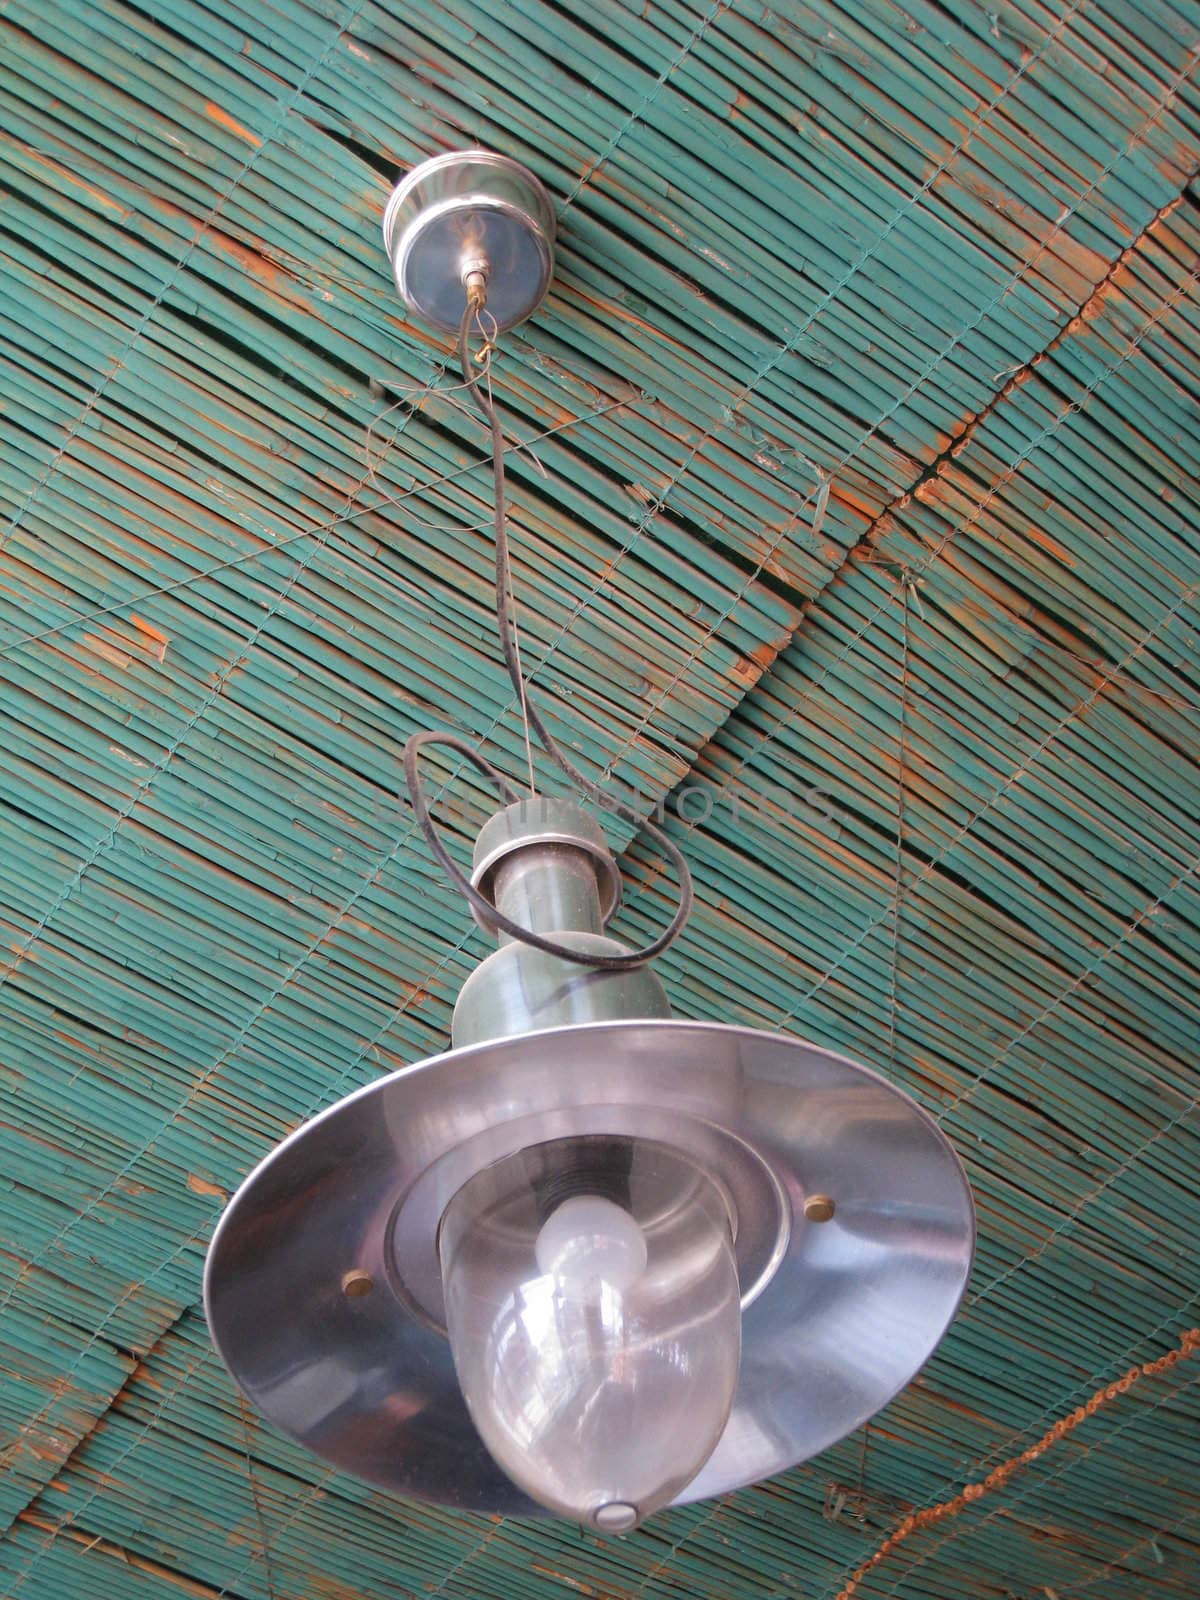 Close-up of a ceiling made of blue reed matt and old fishing lanterns